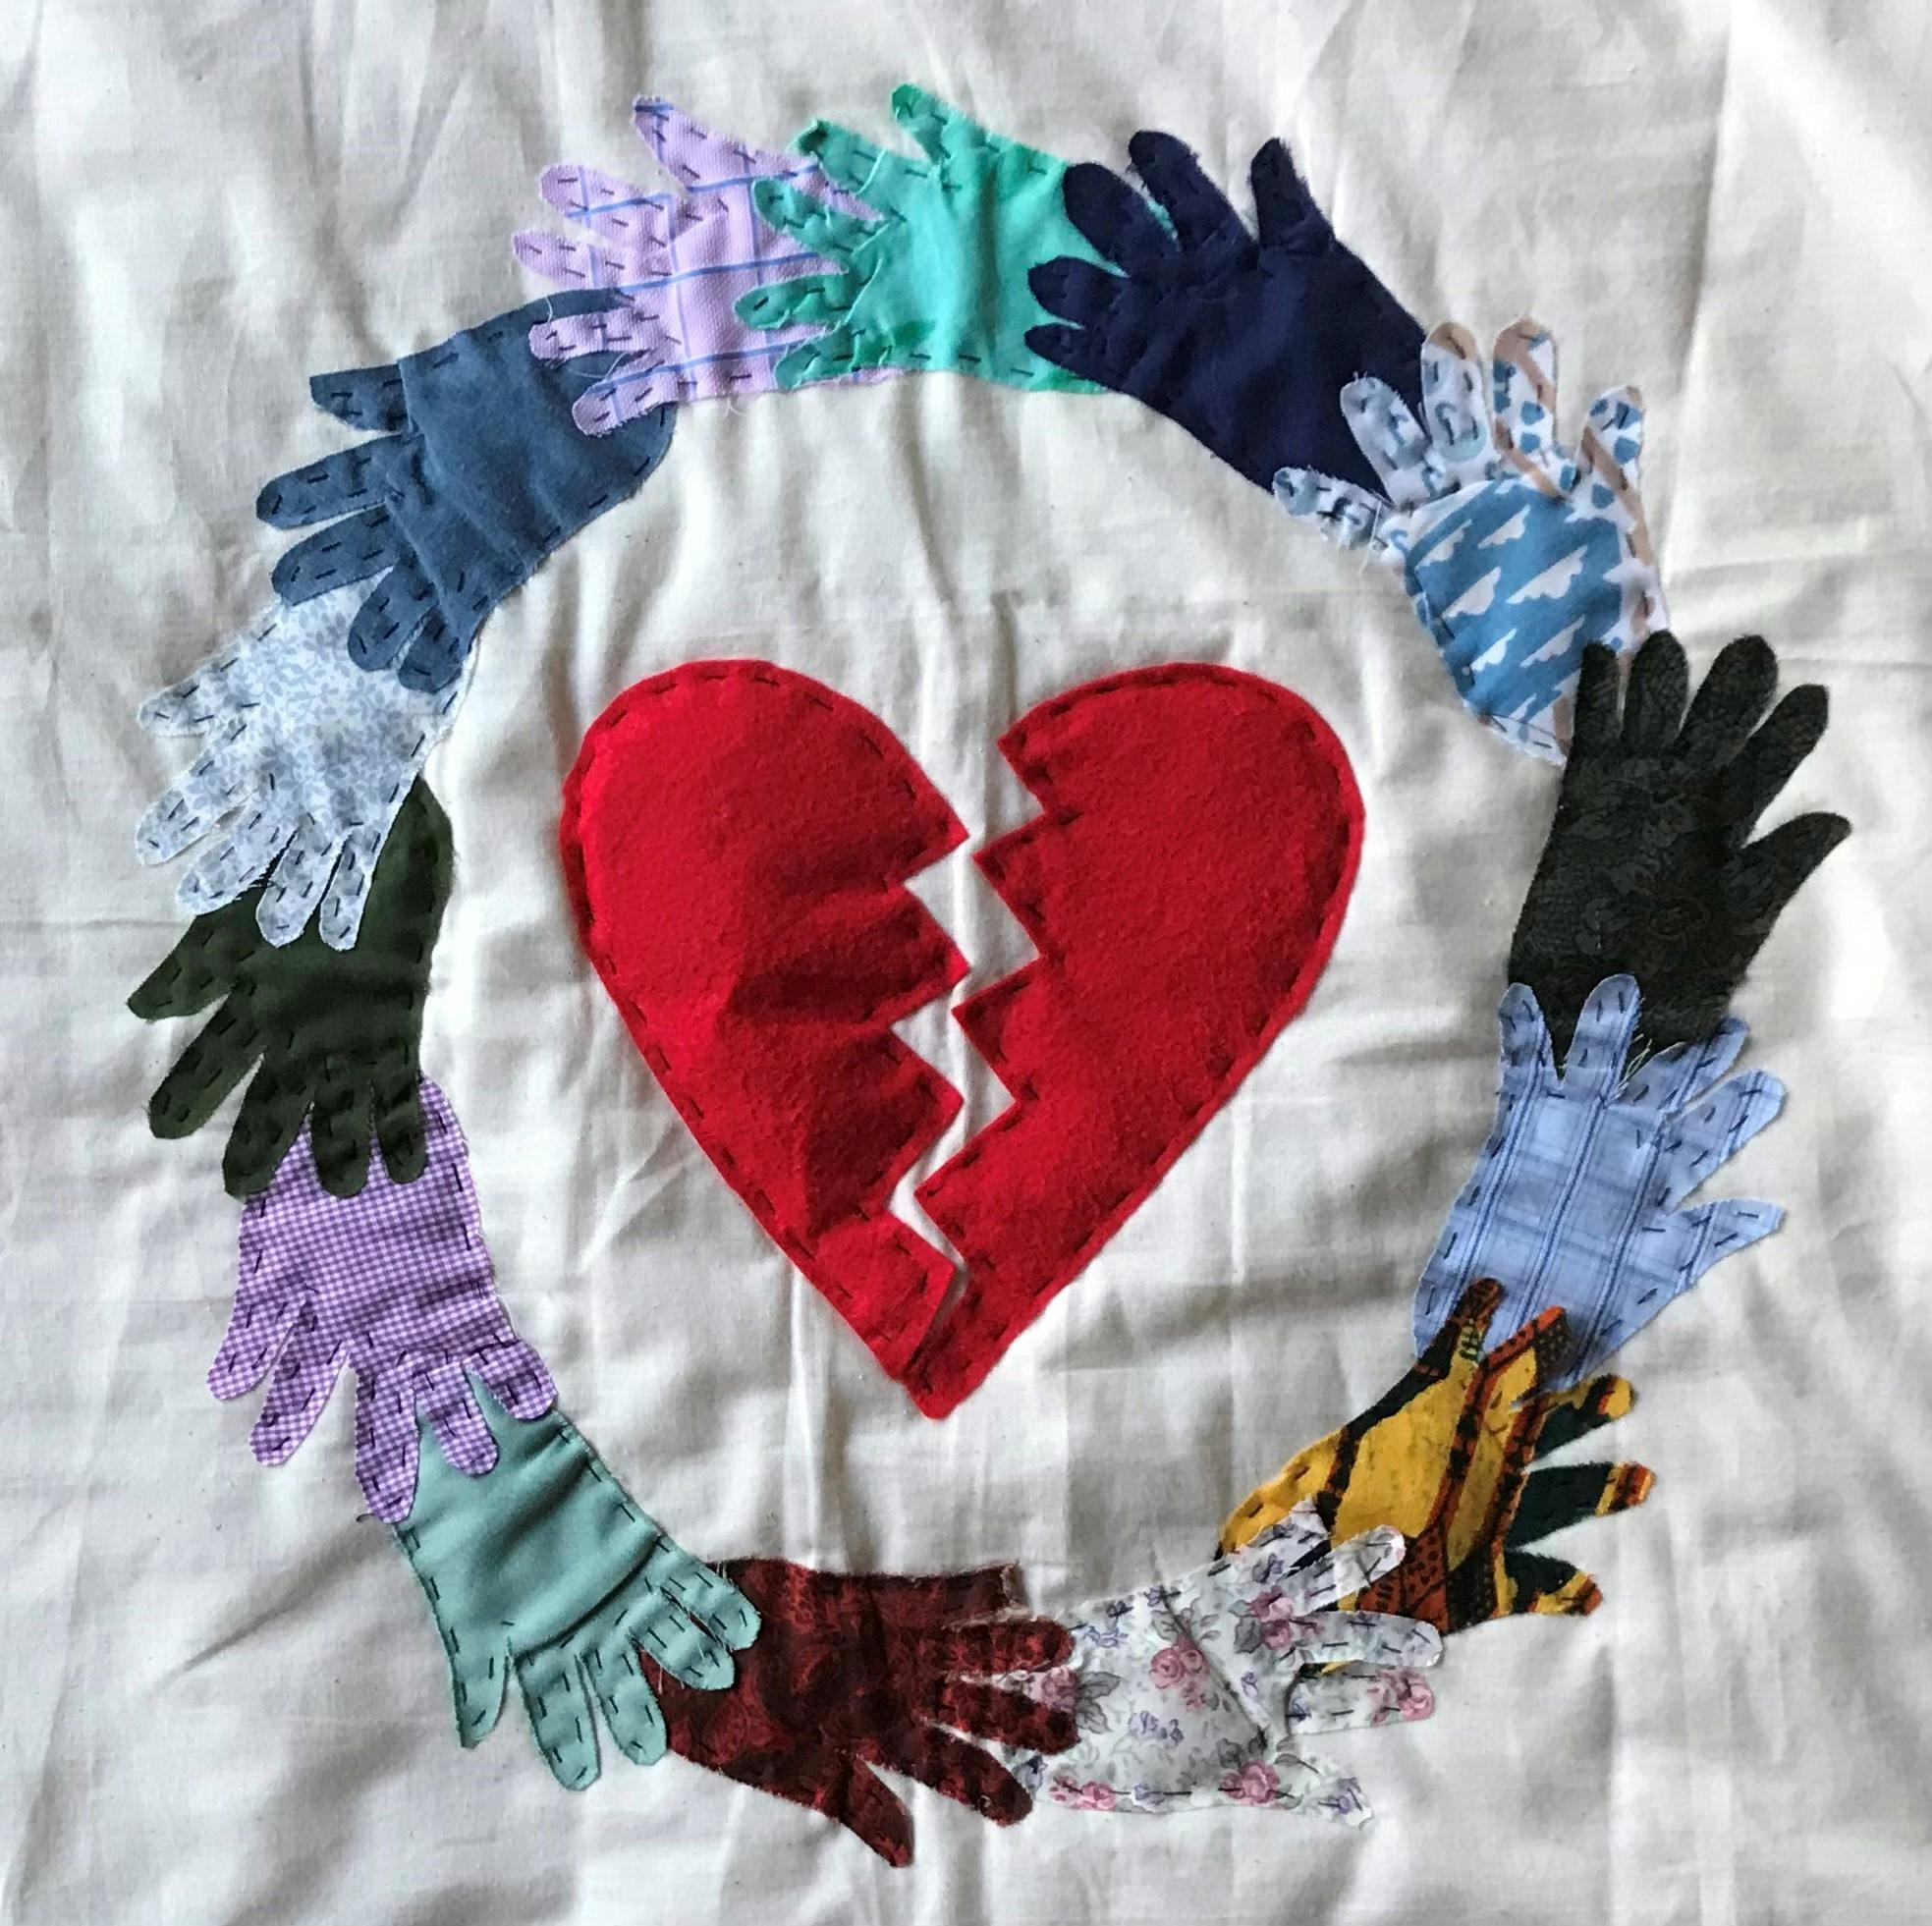 A stitched collage of hands and a broken heart